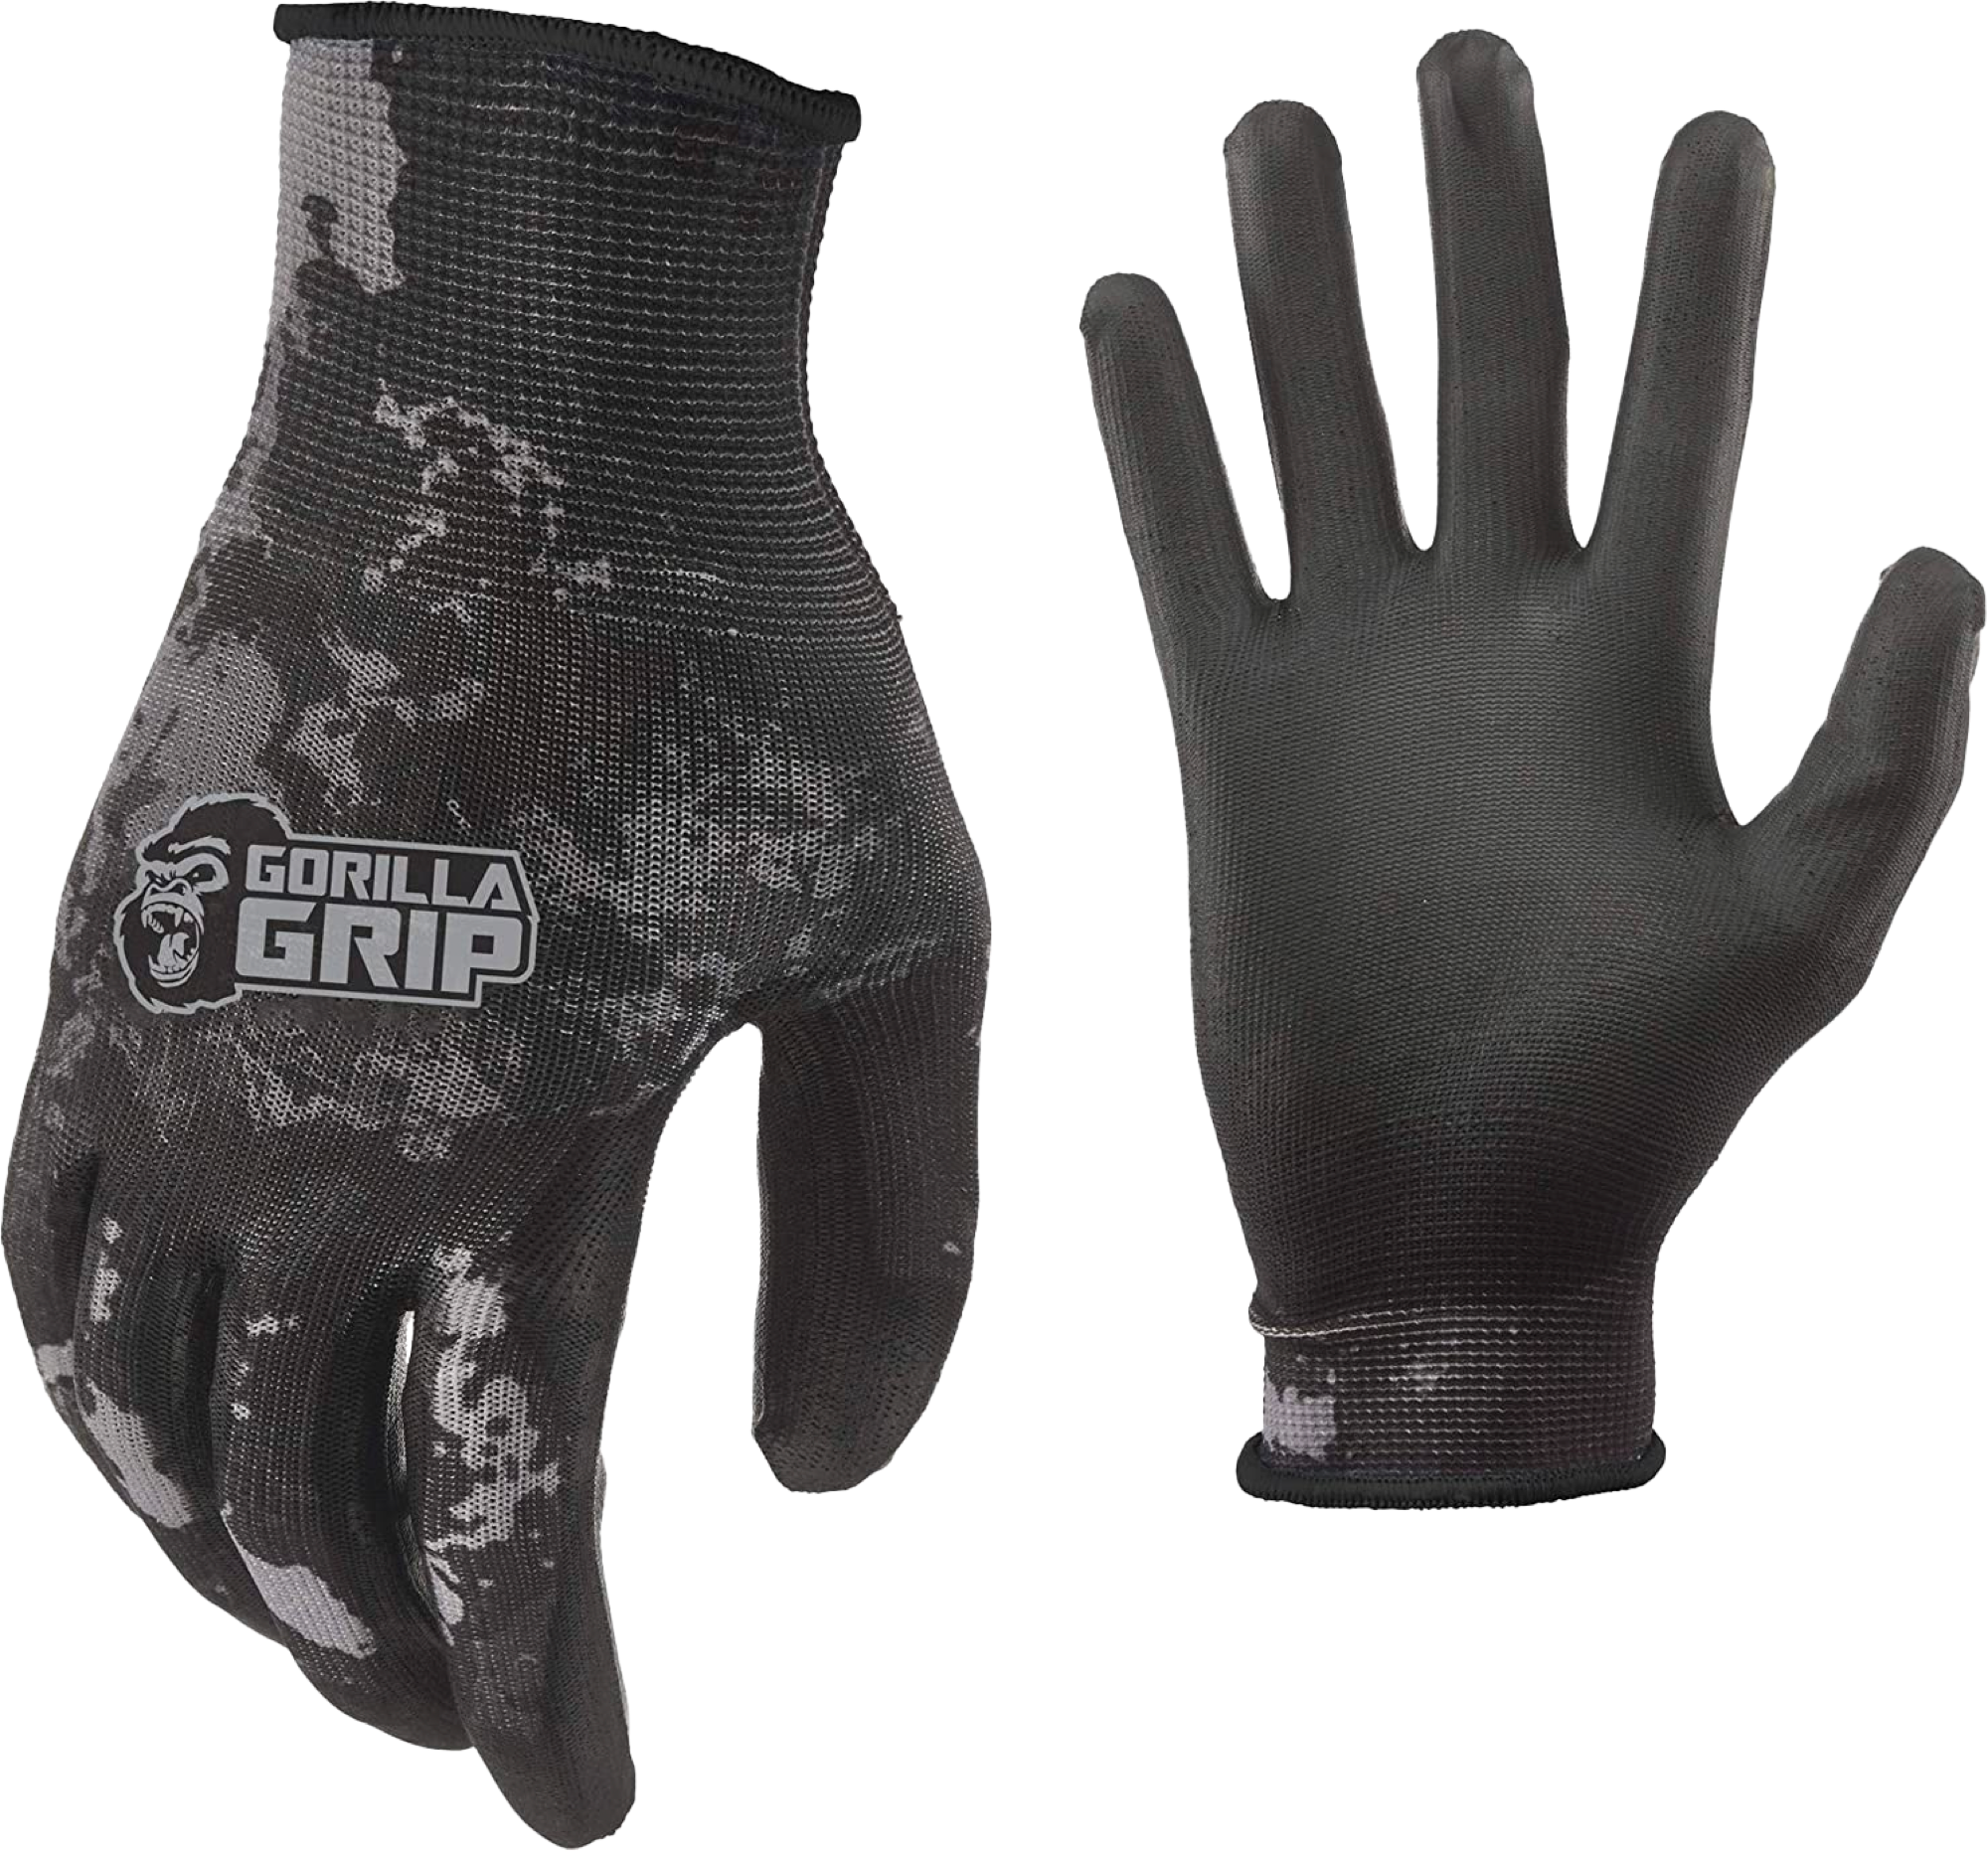 Have you tried out our Gorilla Grip Veil Camo gloves?! 🔥  #GorillaGripGloves #NeverSlipGrip #GetAGrip #GripGloves #CustomerReviews  #Veil …